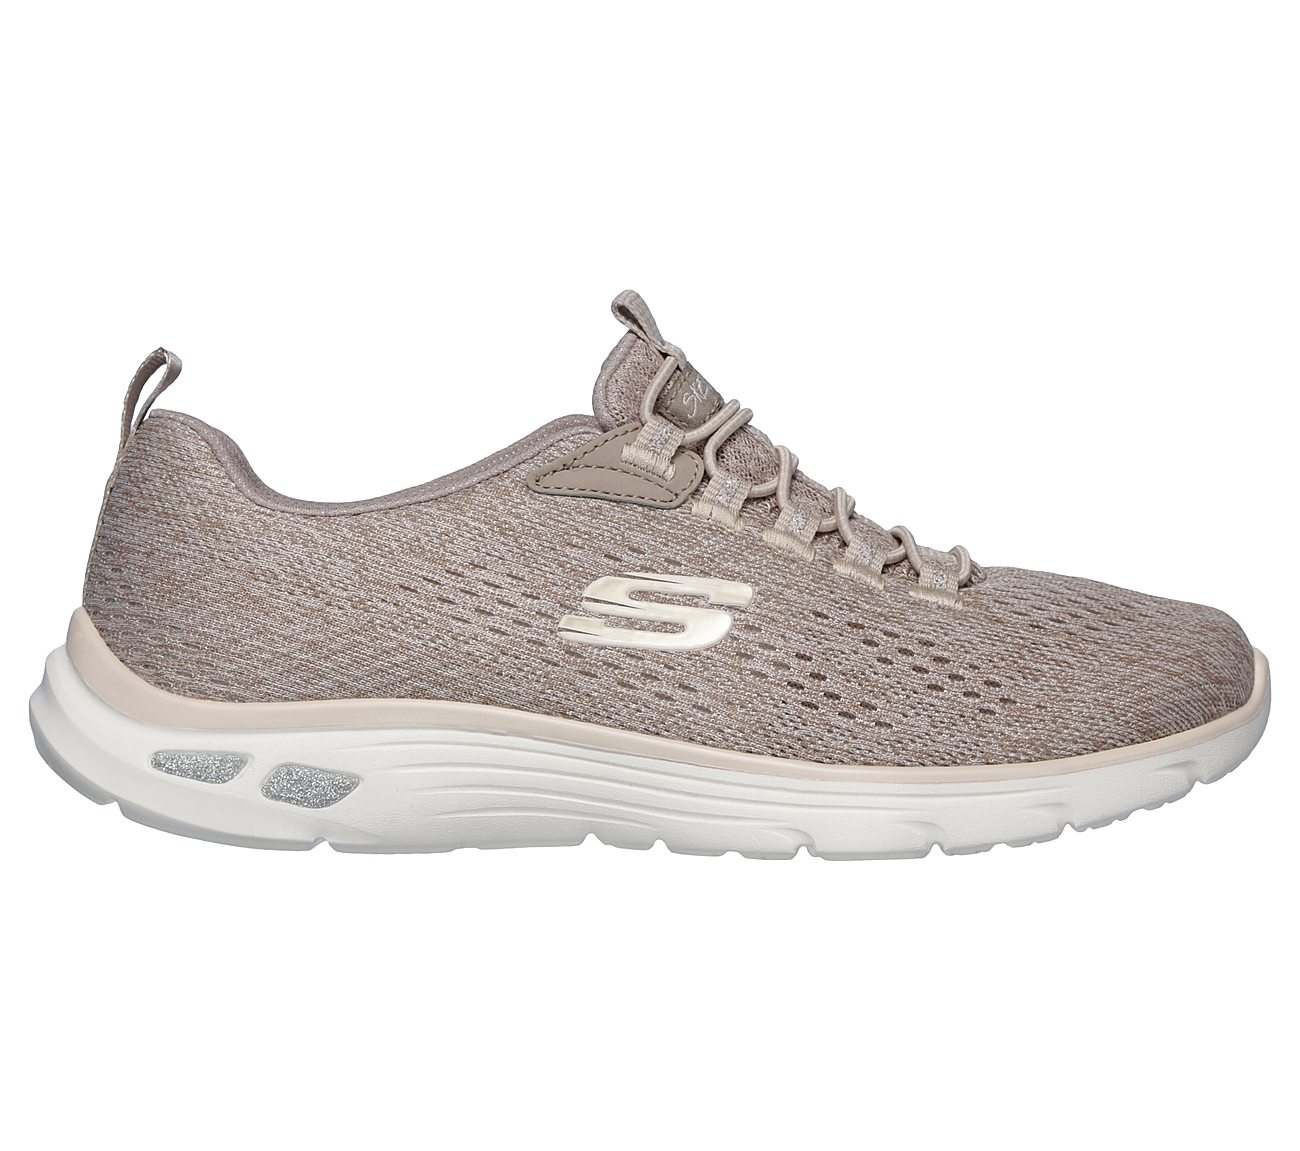 Buy SKECHERS Relaxed Fit: Empire D'Lux - Lively Wind Relaxed Fit Shoes